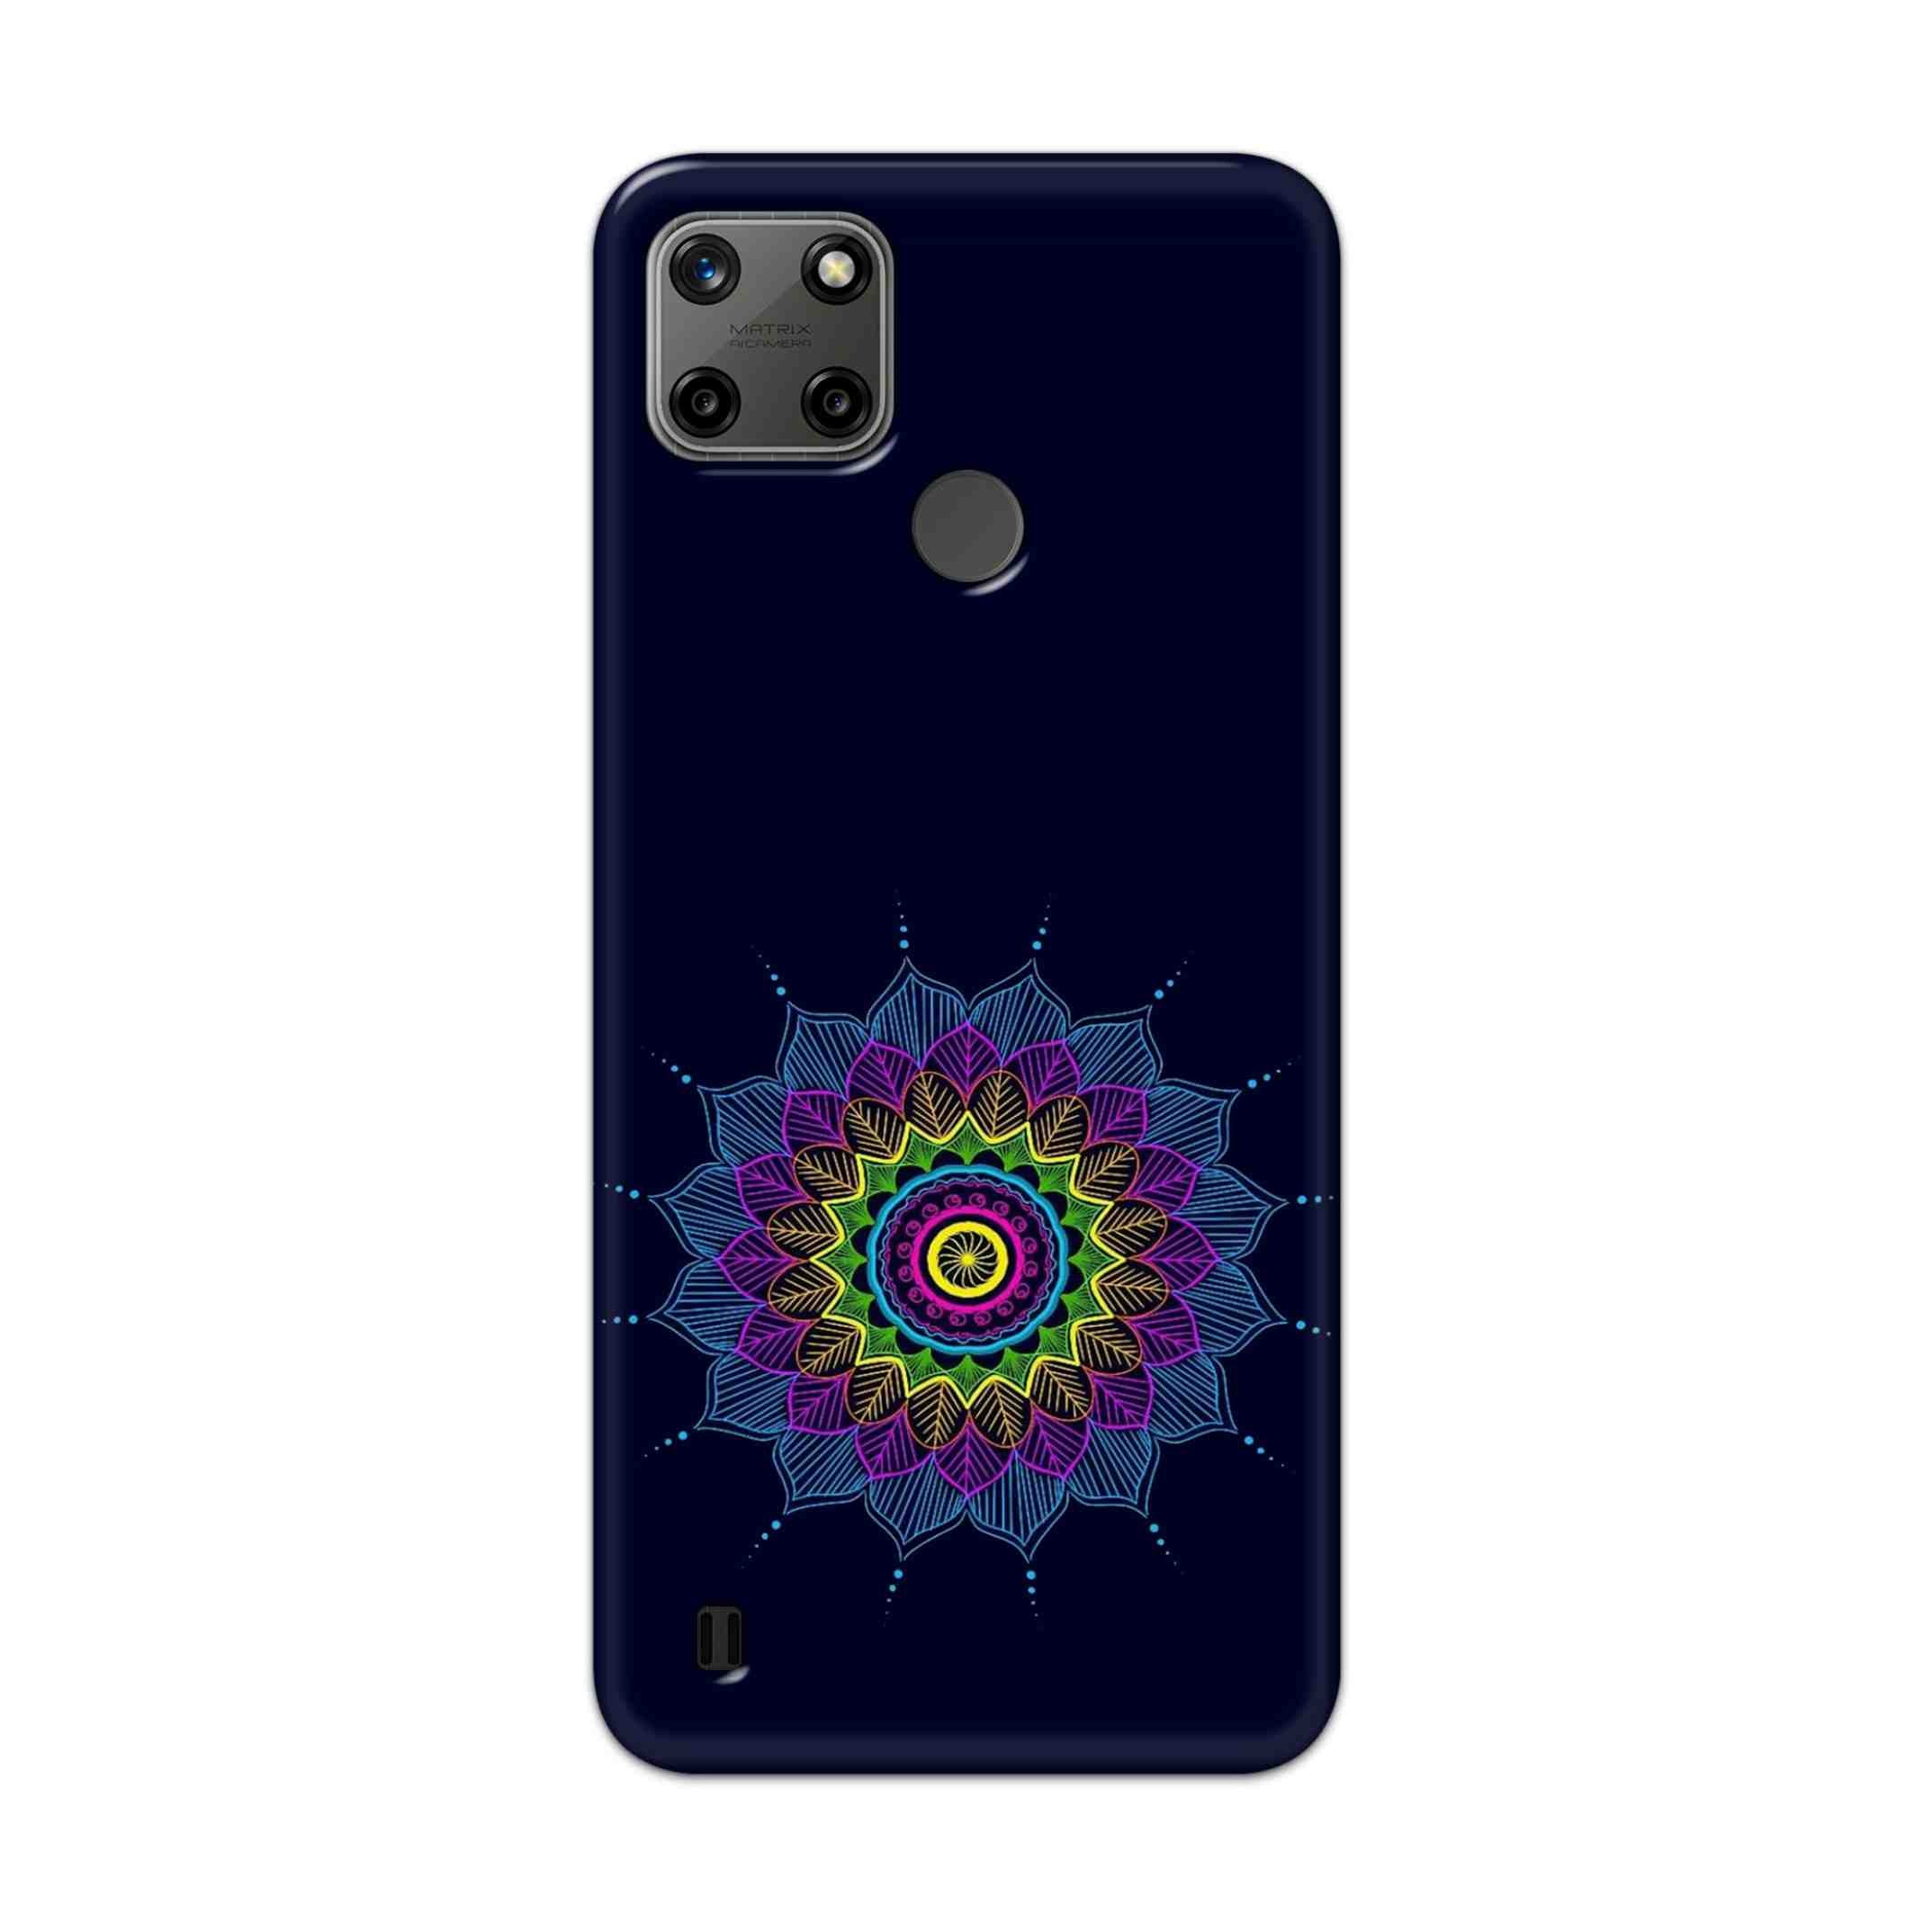 Buy Jung And Mandalas Hard Back Mobile Phone Case Cover For Realme C25Y Online